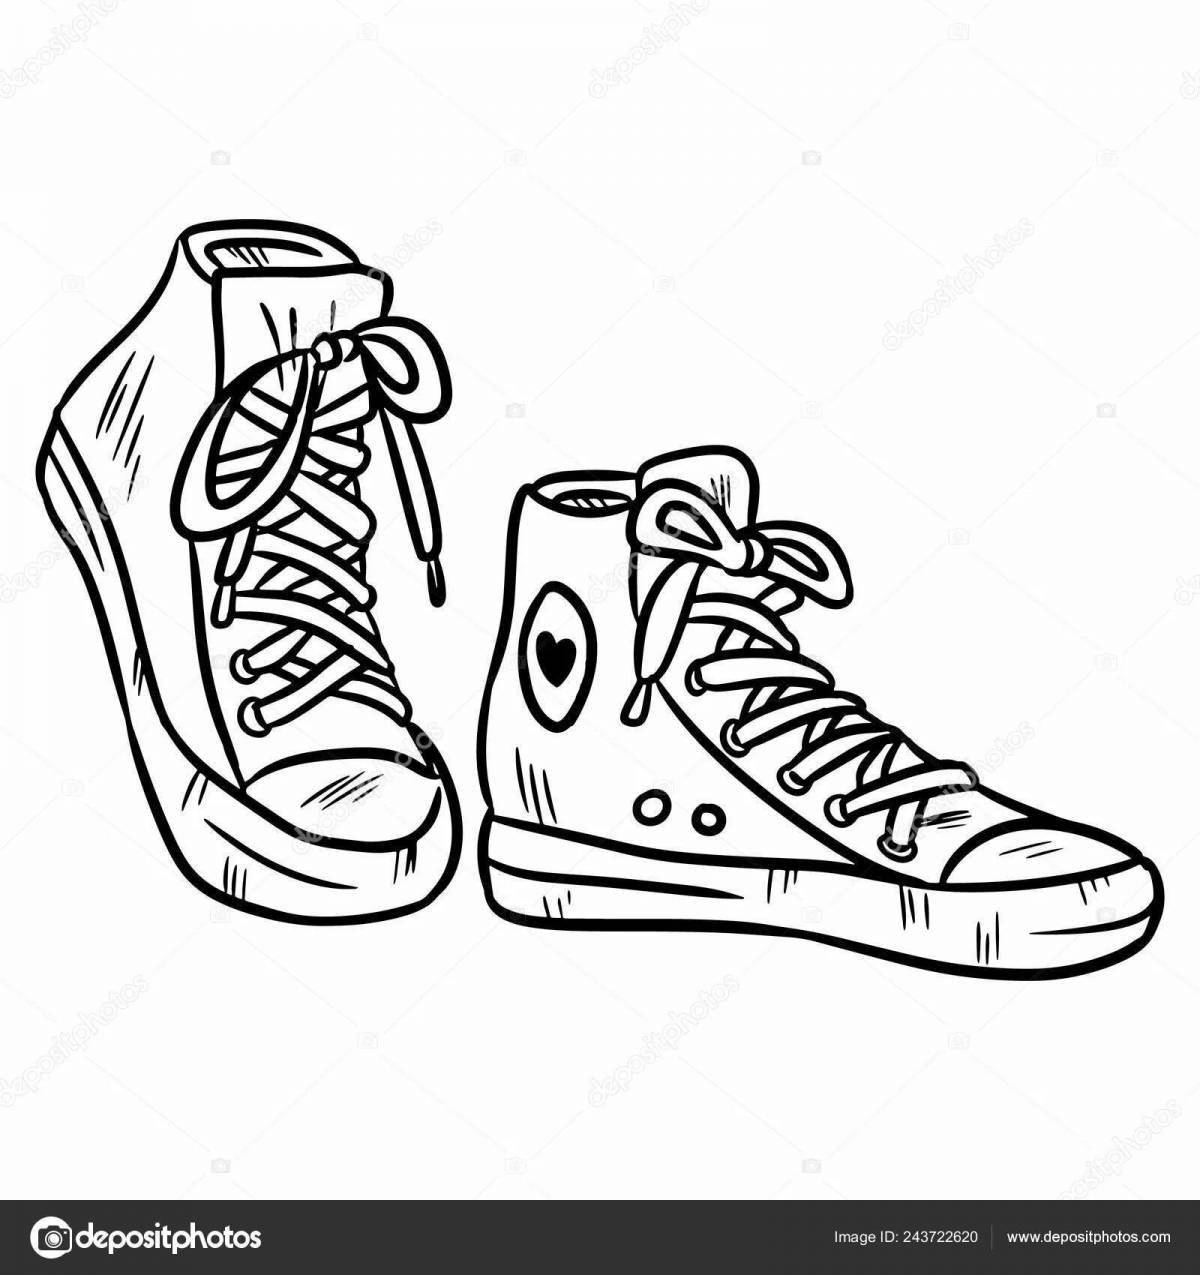 Playful coloring page of sneakers for toddlers